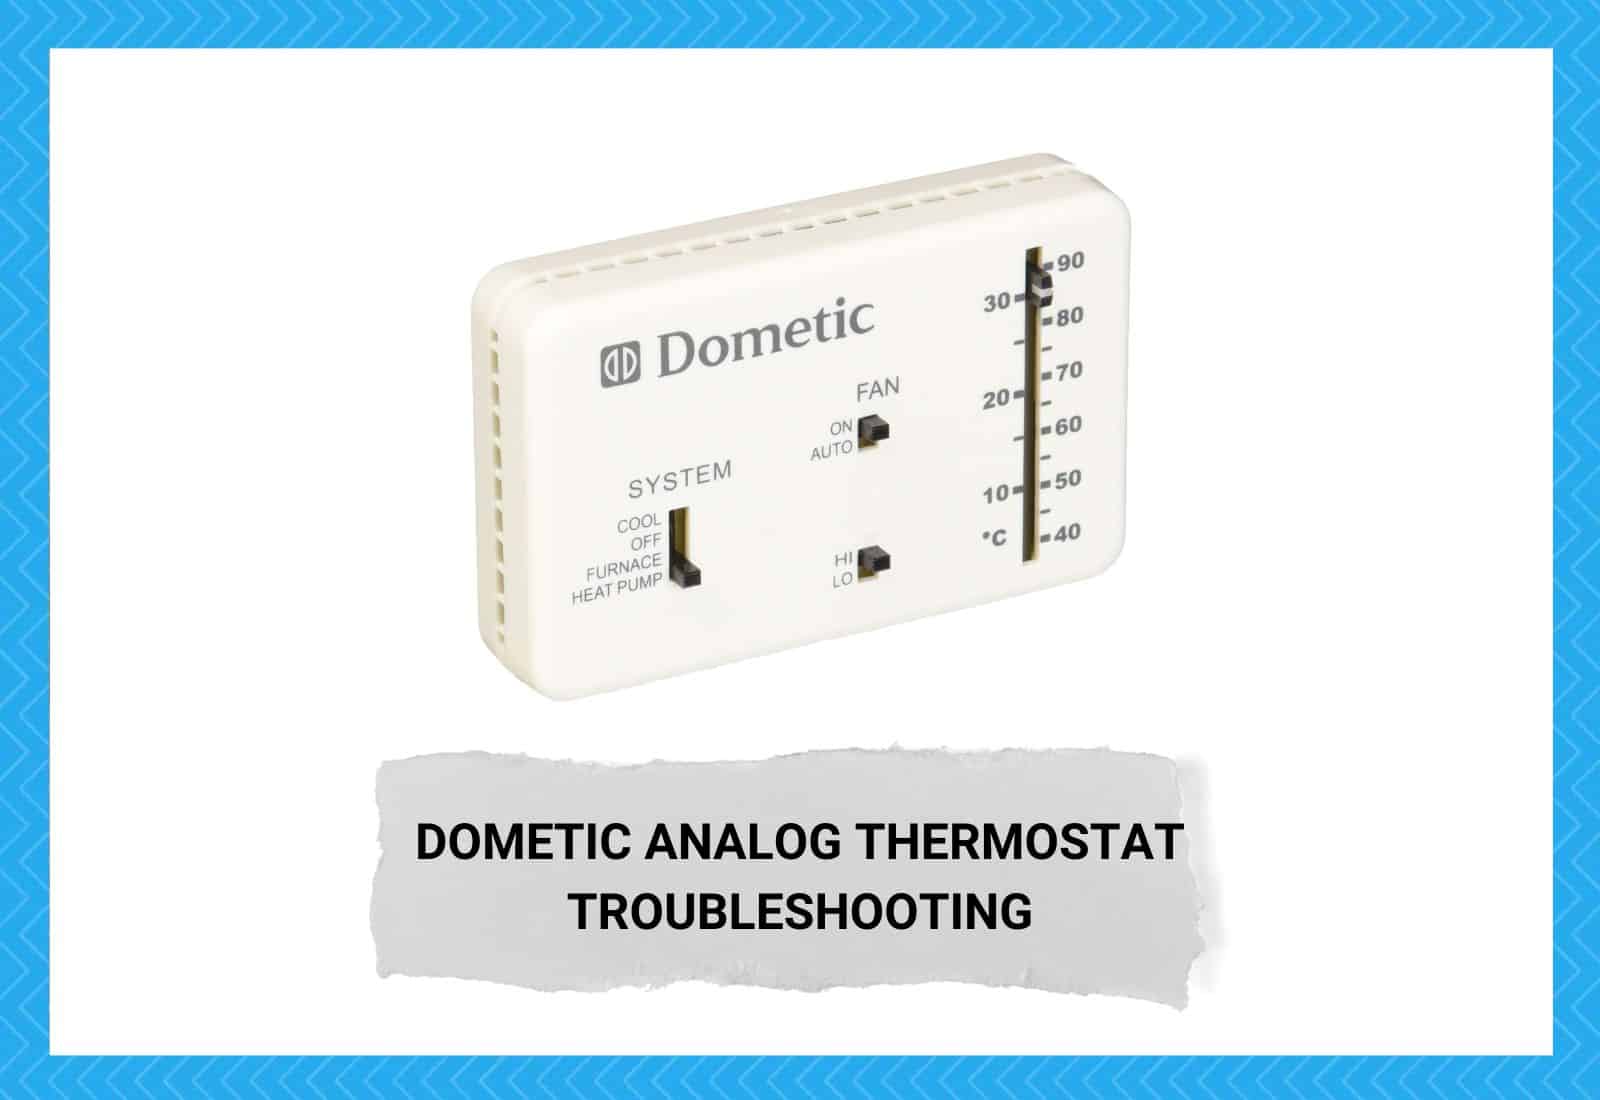 Dometic Analog Thermostat Troubleshooting